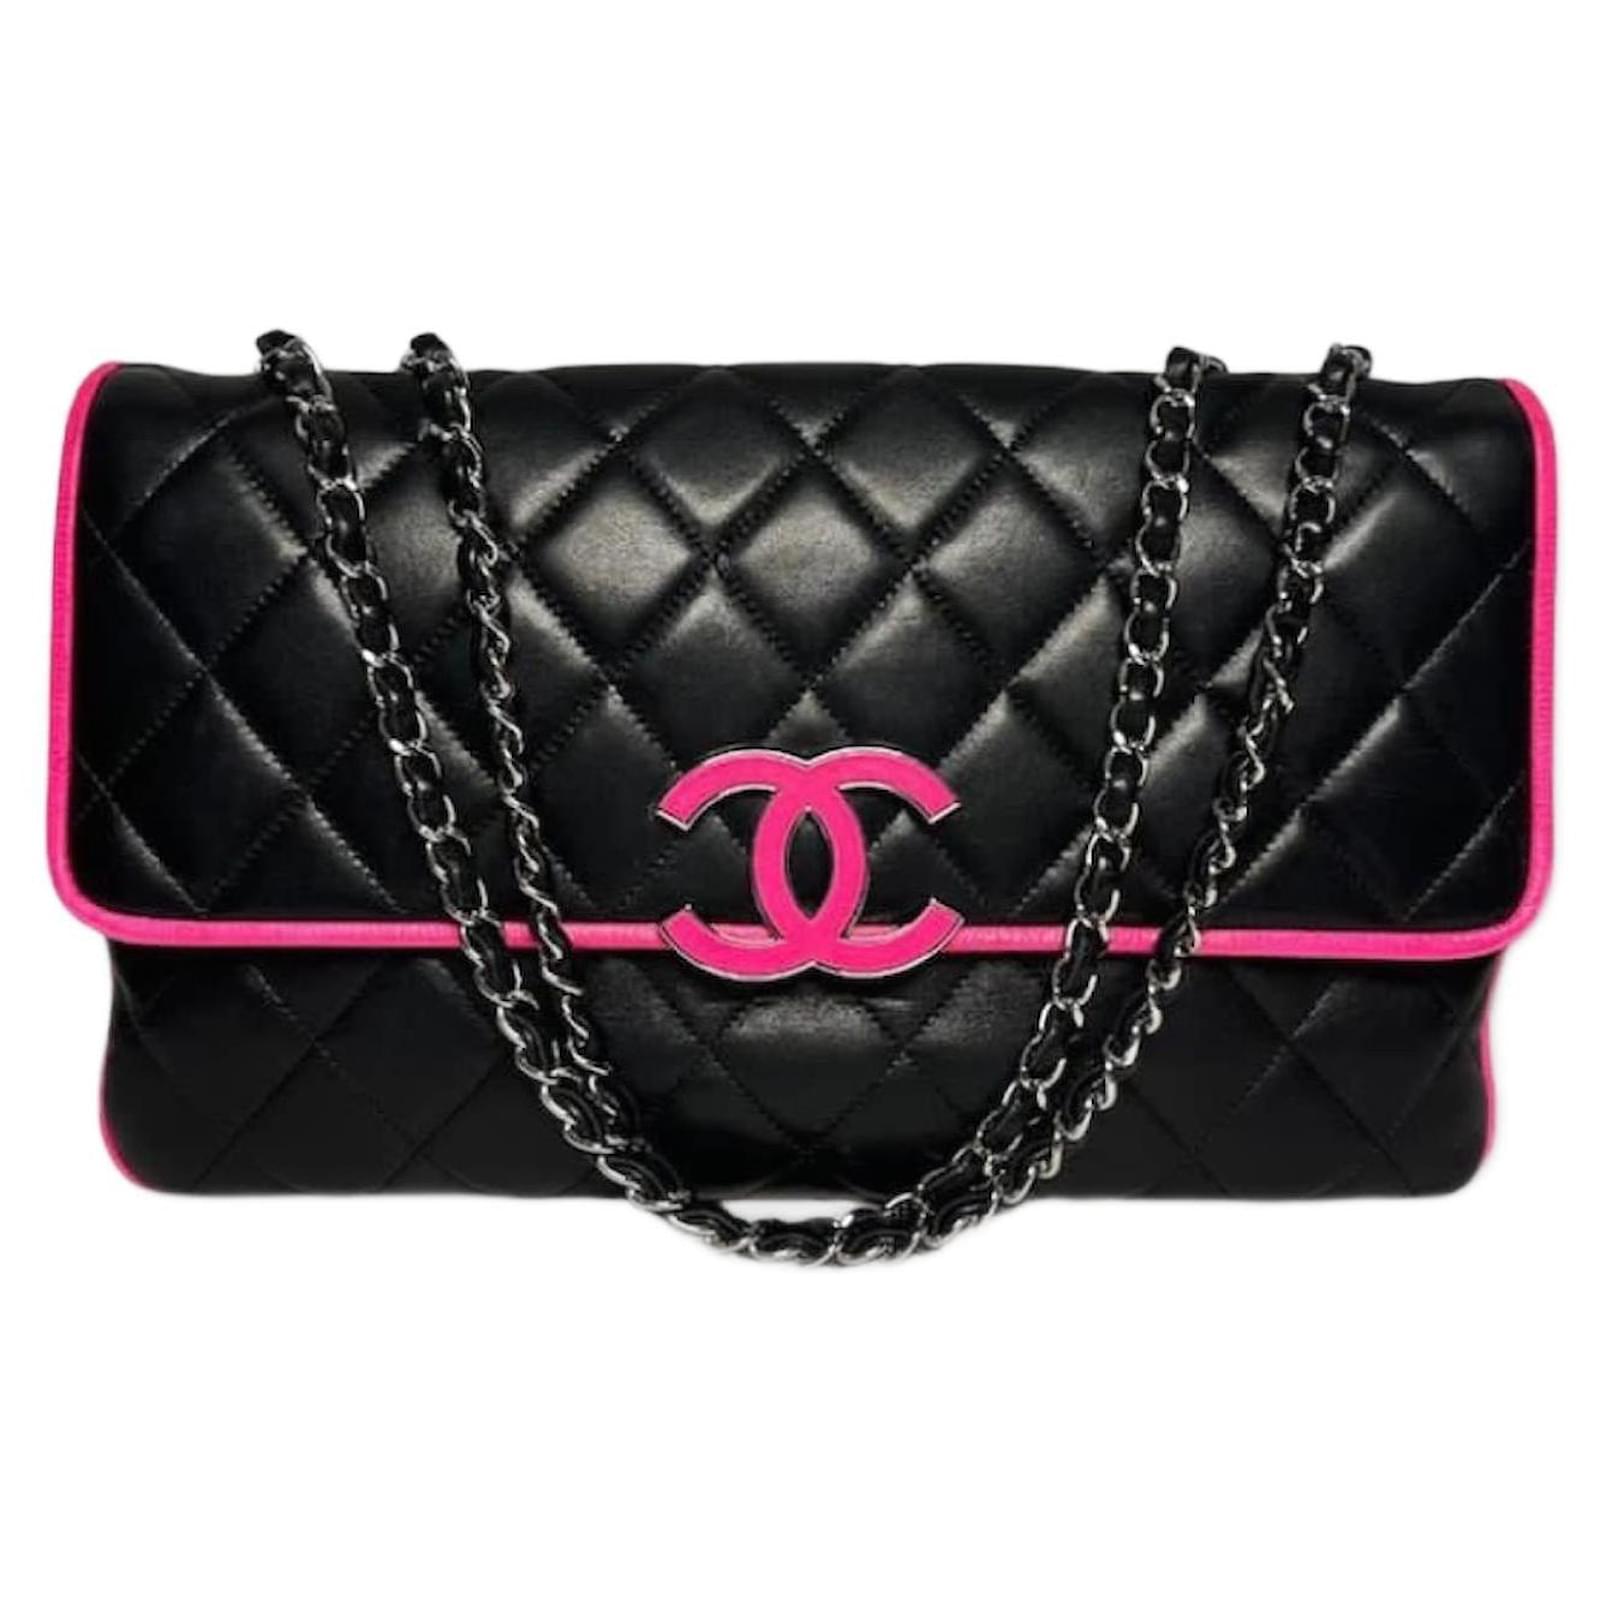 pink and white chanel purse black